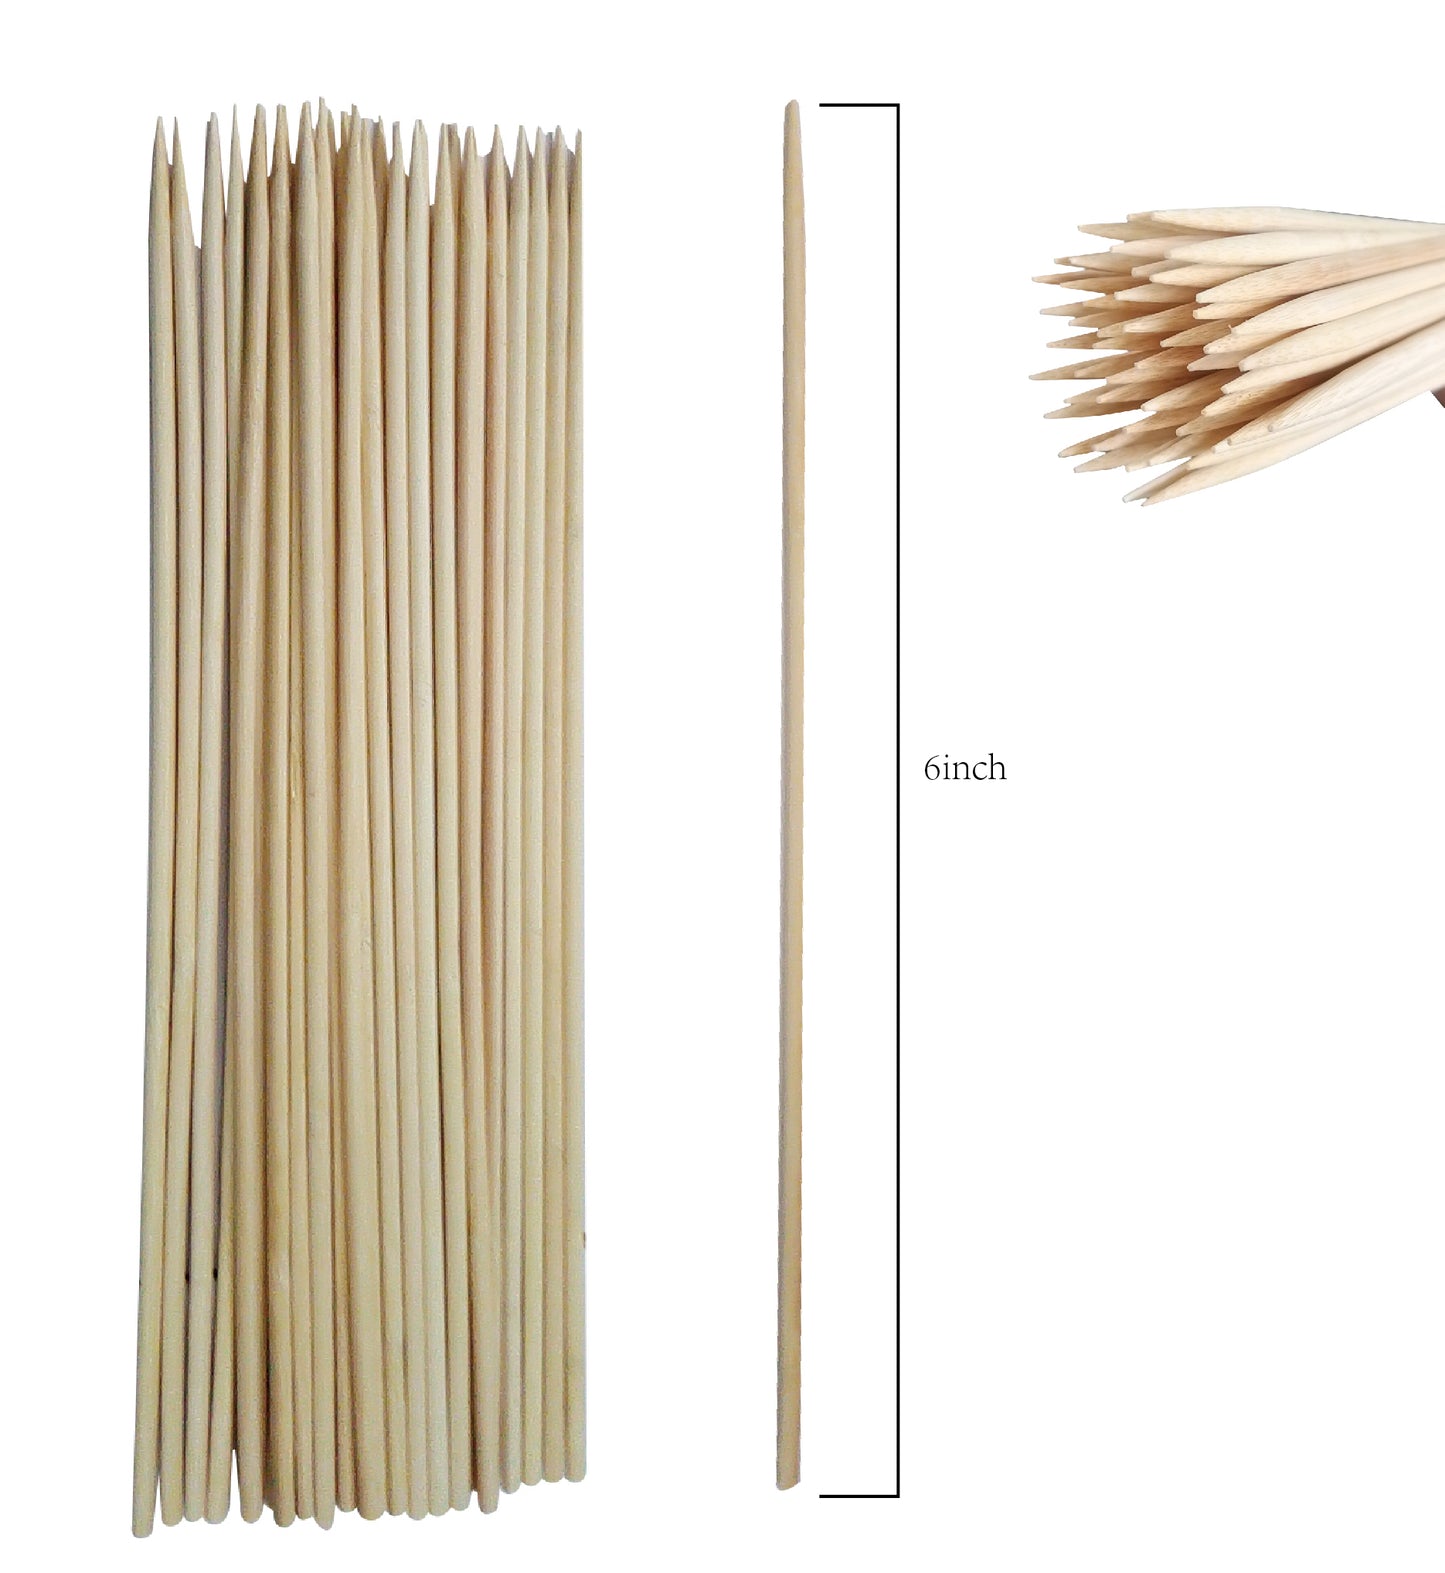 100 X Bamboo Skewers Wooden Sticks for Party BBQ Kebab Fruit